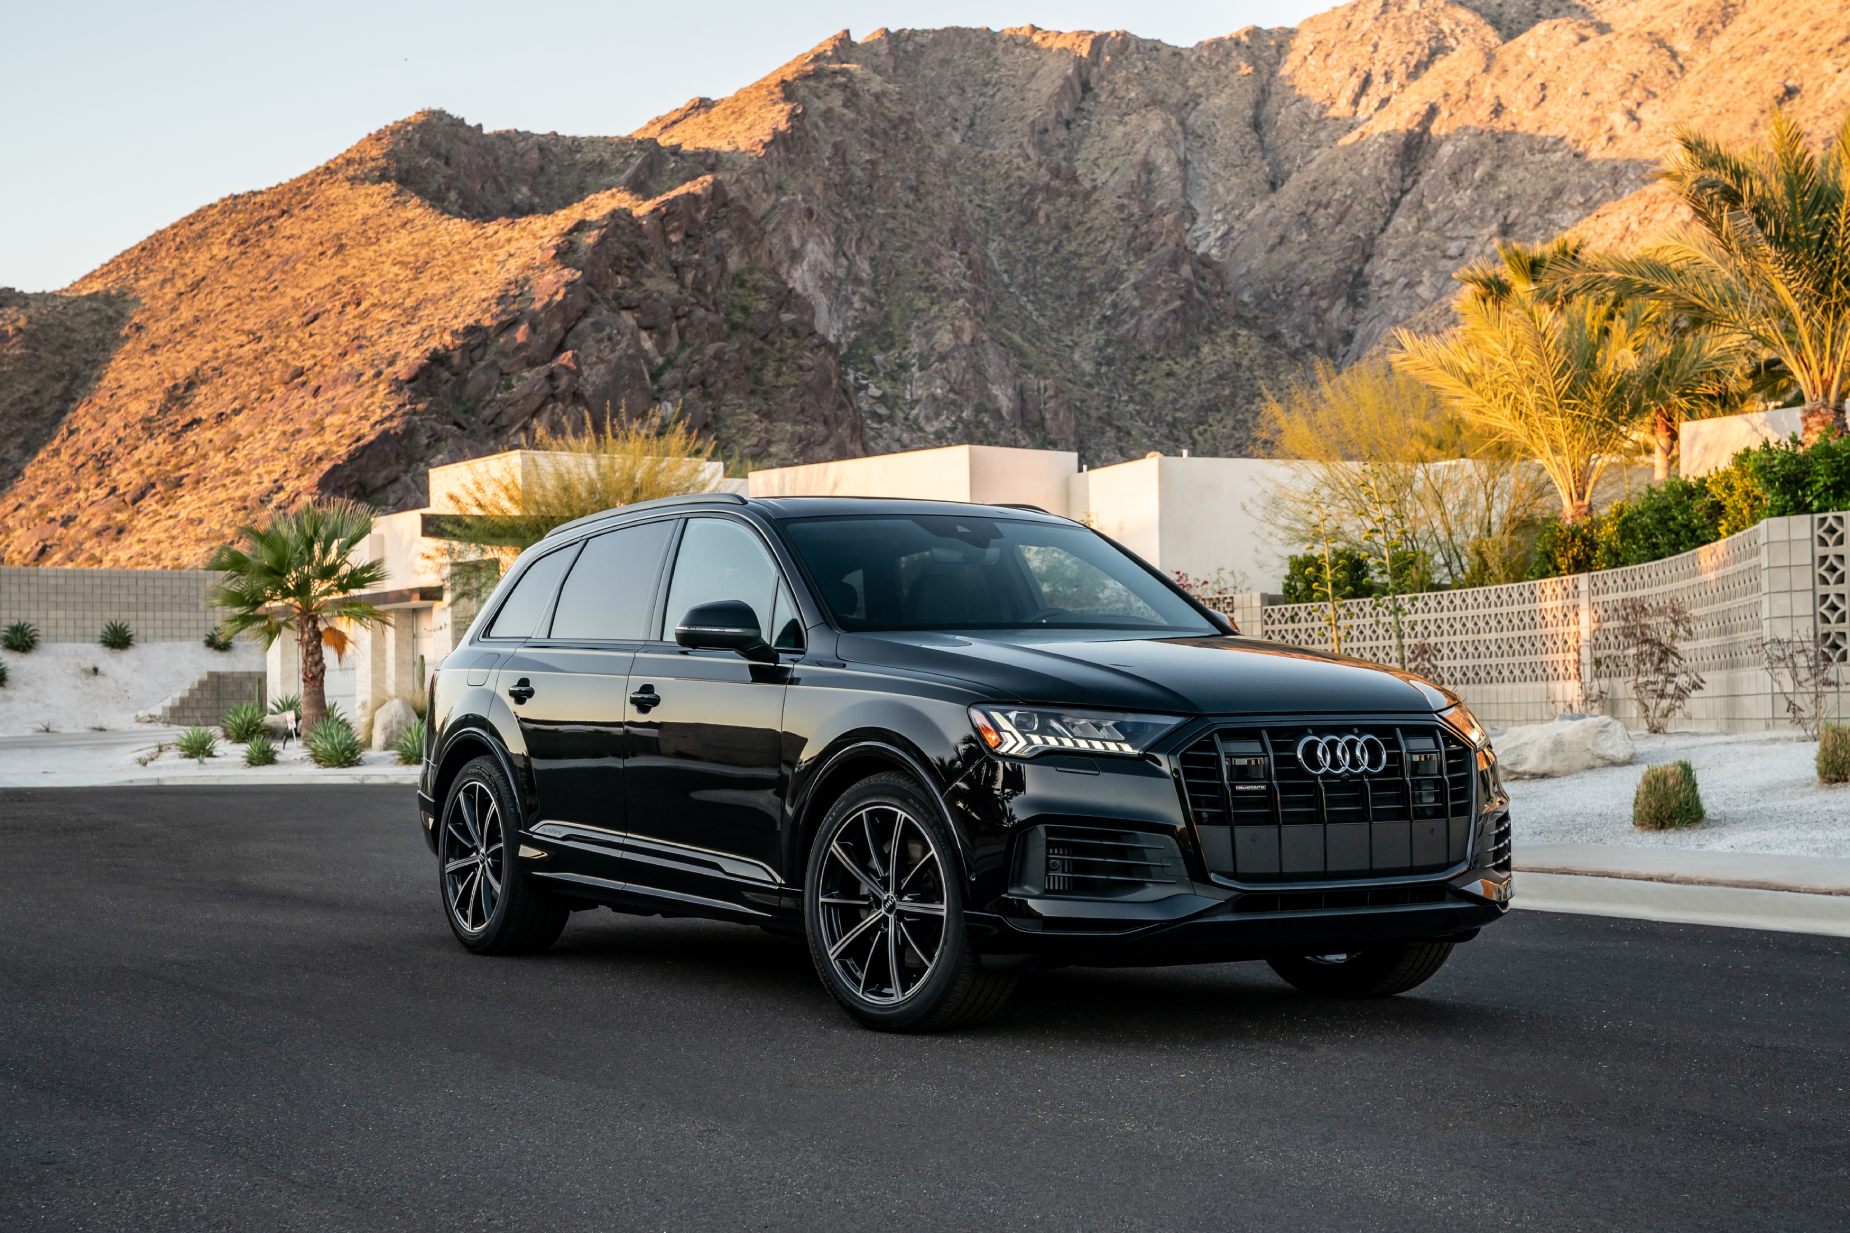 A black 2021 Audi Q7 parked on display